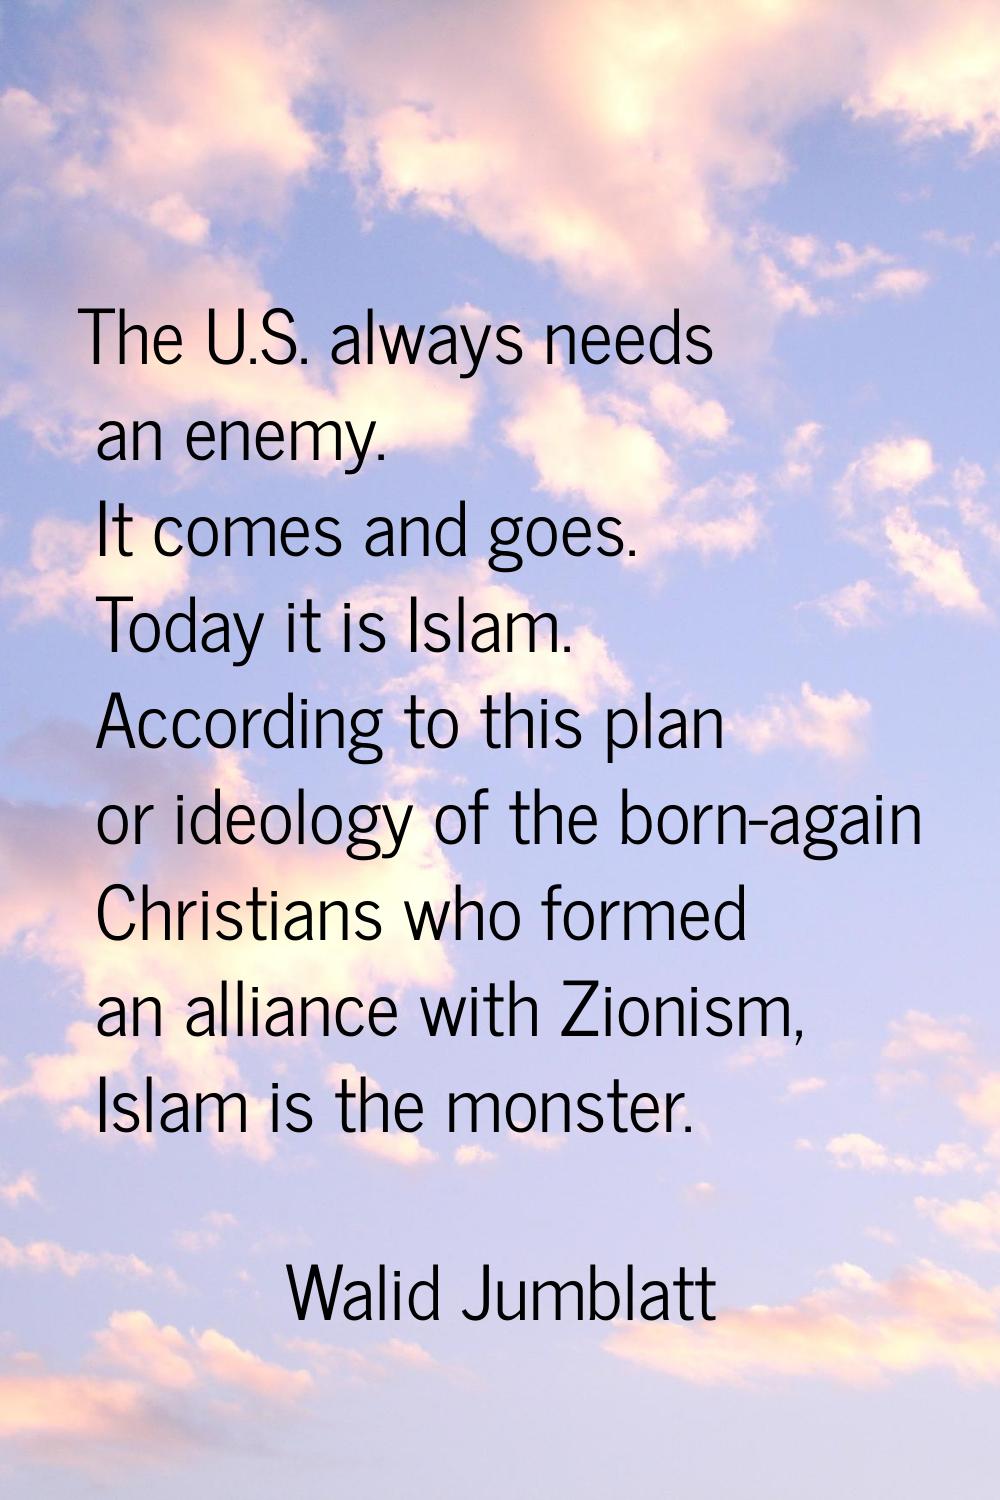 The U.S. always needs an enemy. It comes and goes. Today it is Islam. According to this plan or ide